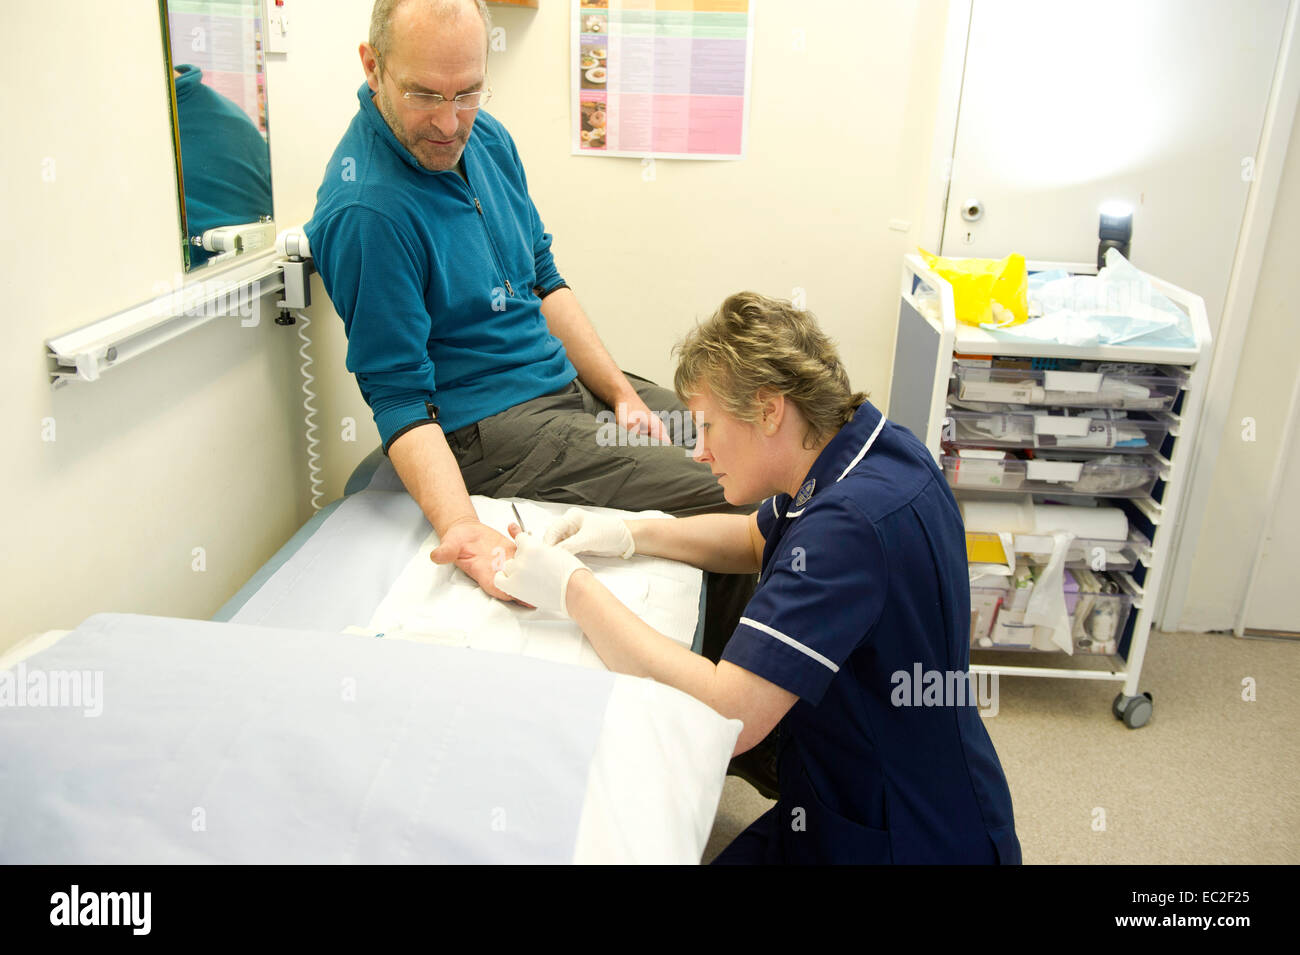 A nurse attending a patient at an NHS clinic Stock Photo